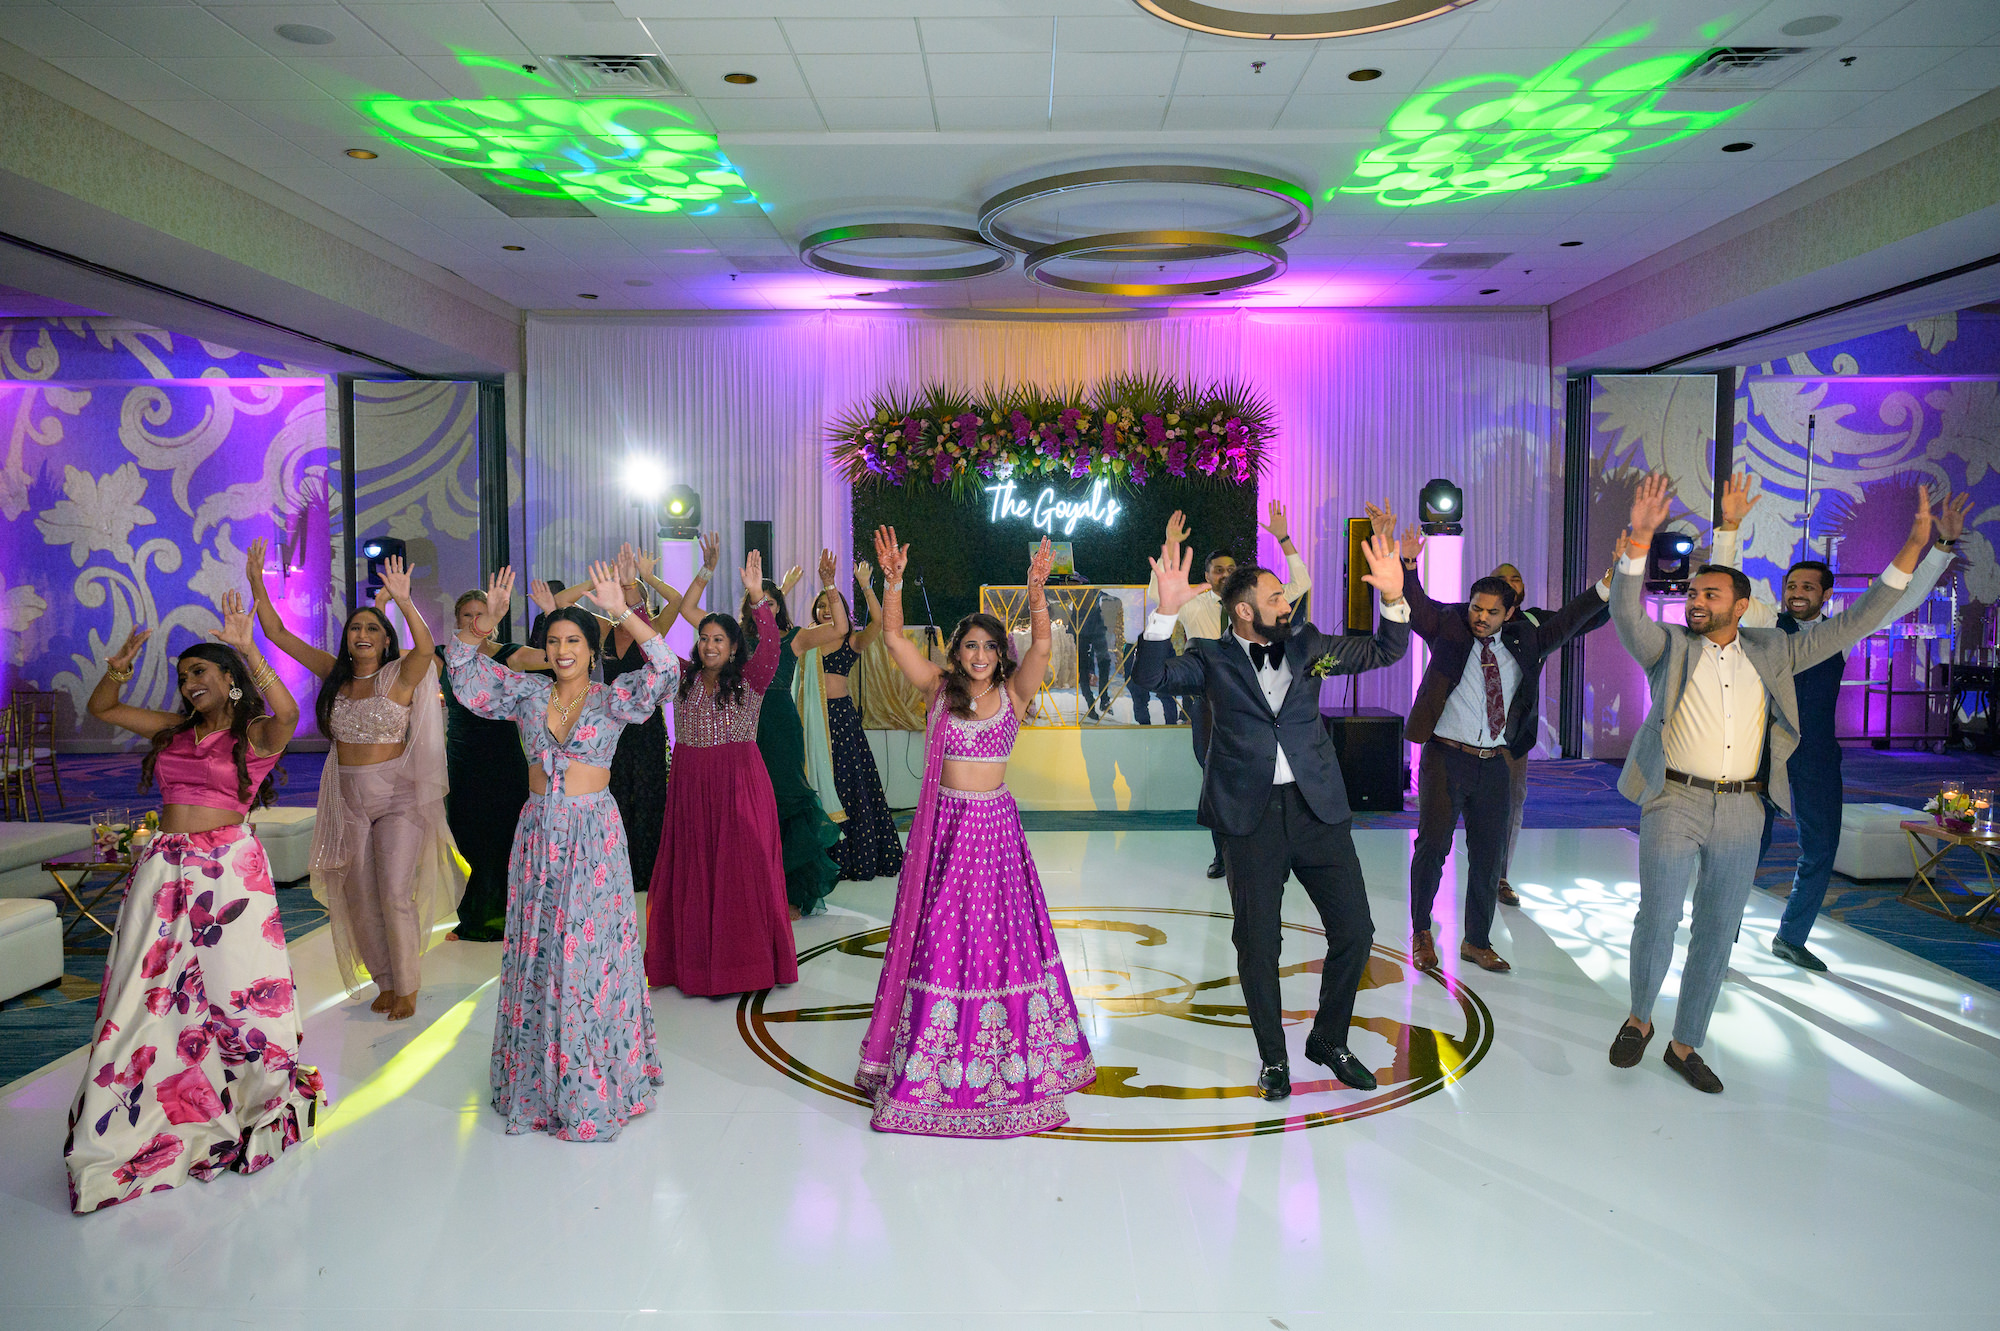 Indian Bride and Groom Dance on Luxurious All White Dance Floor with Gold Monogram, Bride Wearing Traditional Indian Fuchsia Lehenga and Groom Wearing Modern Black Tuxedo | Tampa Bay Hotel Venue Hilton Clearwater Beach Resort and Spa